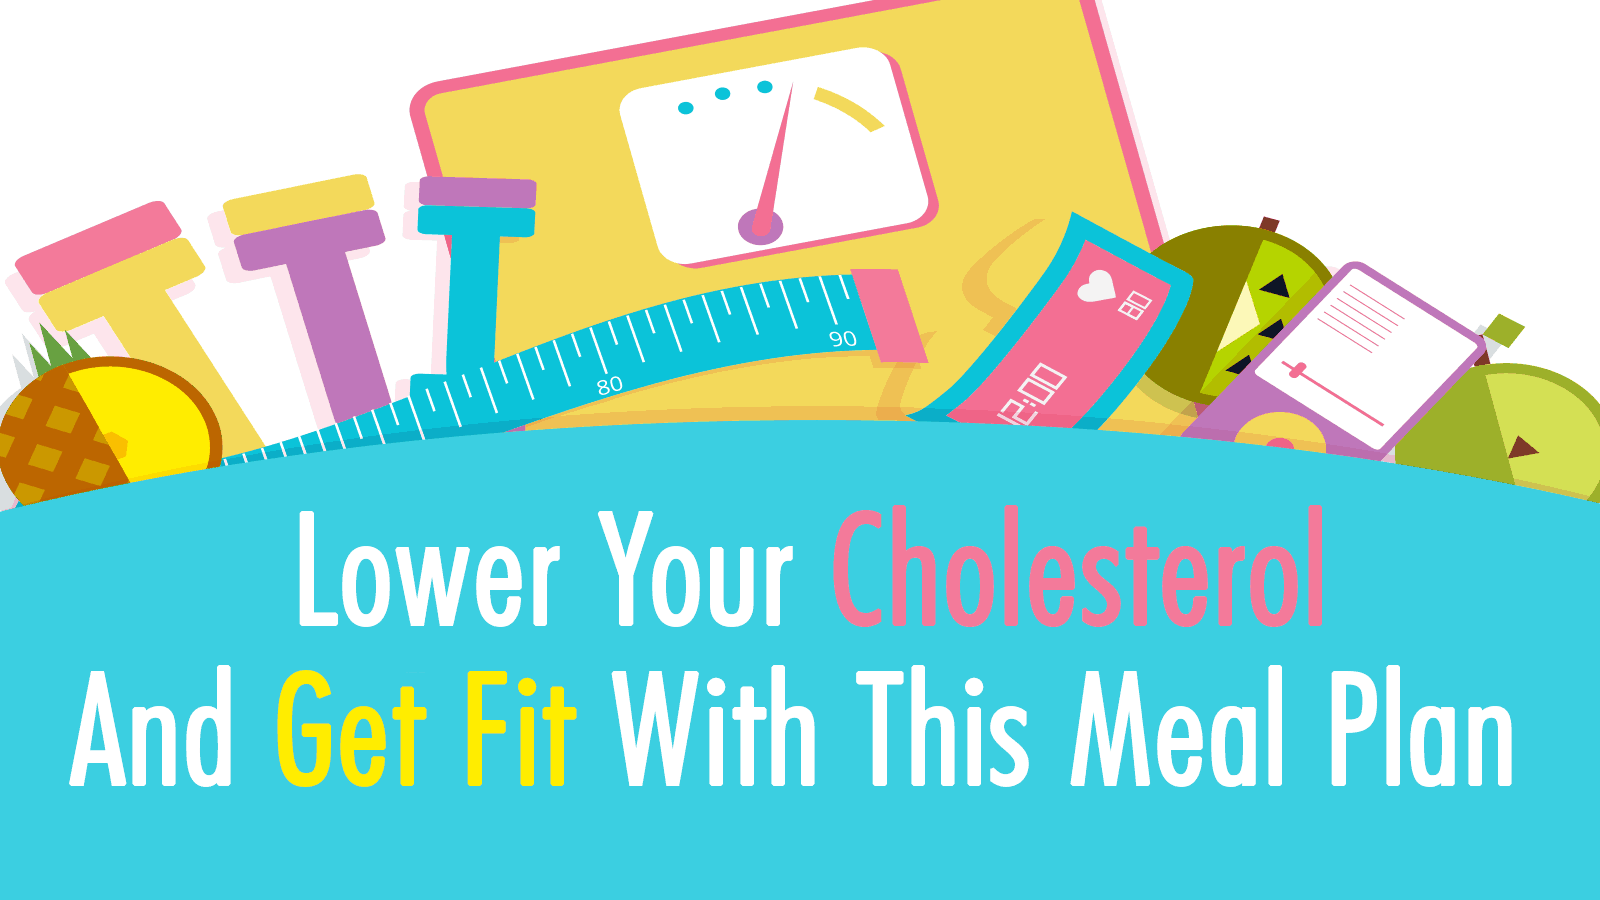 Lower your cholesterol